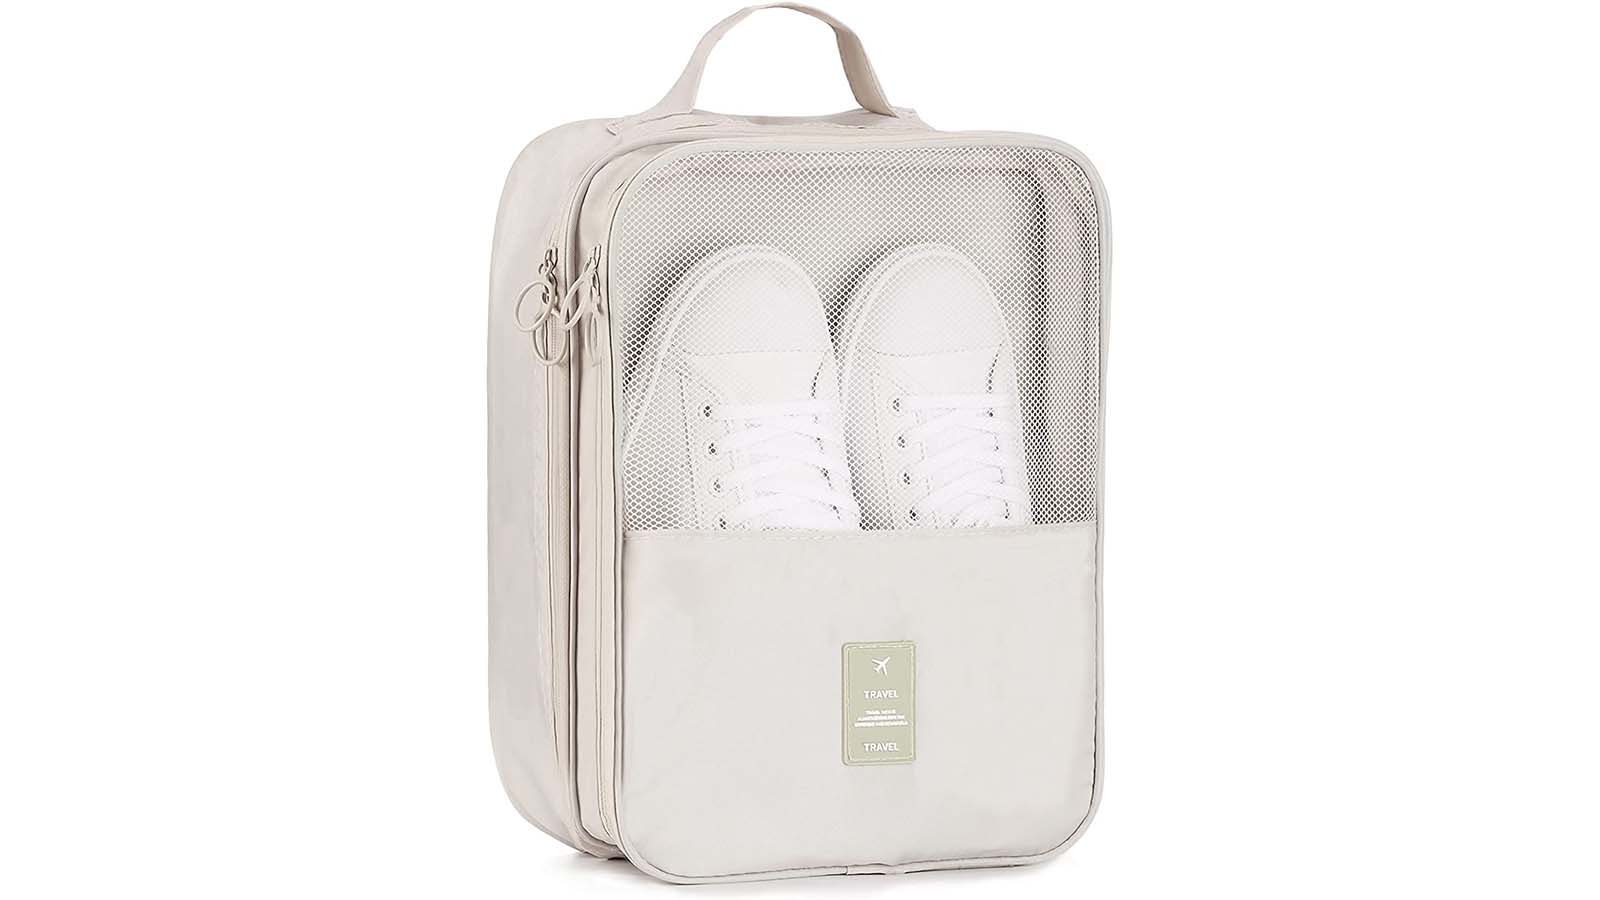 https://media.cnn.com/api/v1/images/stellar/prod/underscored-travelshoebags-hezelf-shoe-storage-pouch-for-travel-and-daily-use.jpg?q=h_900,w_1600,x_0,y_0